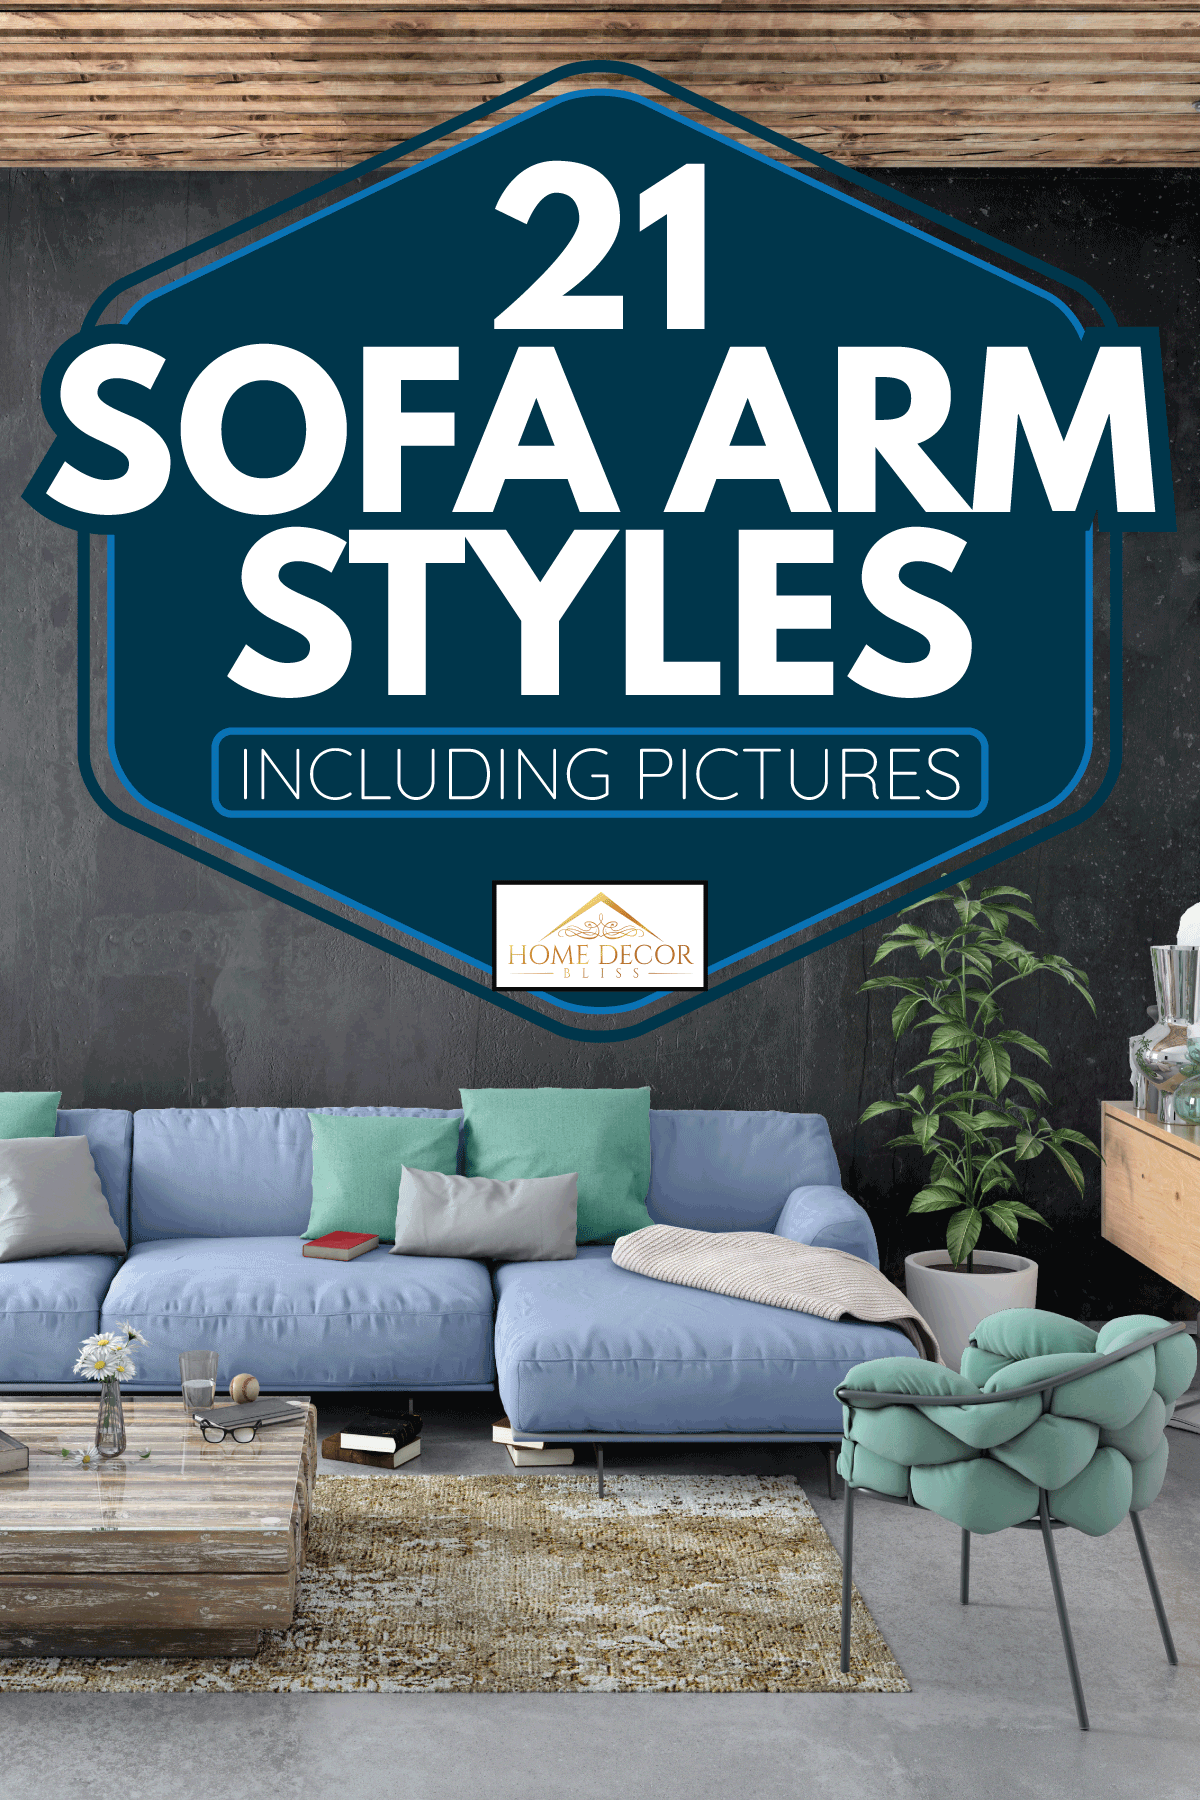 Modern Nordic Scandinavian styled apartment with large pastel colored sofa. Concrete textured wall, concrete floor with carpet. 21 Sofa Arm Styles [Including Pictures]